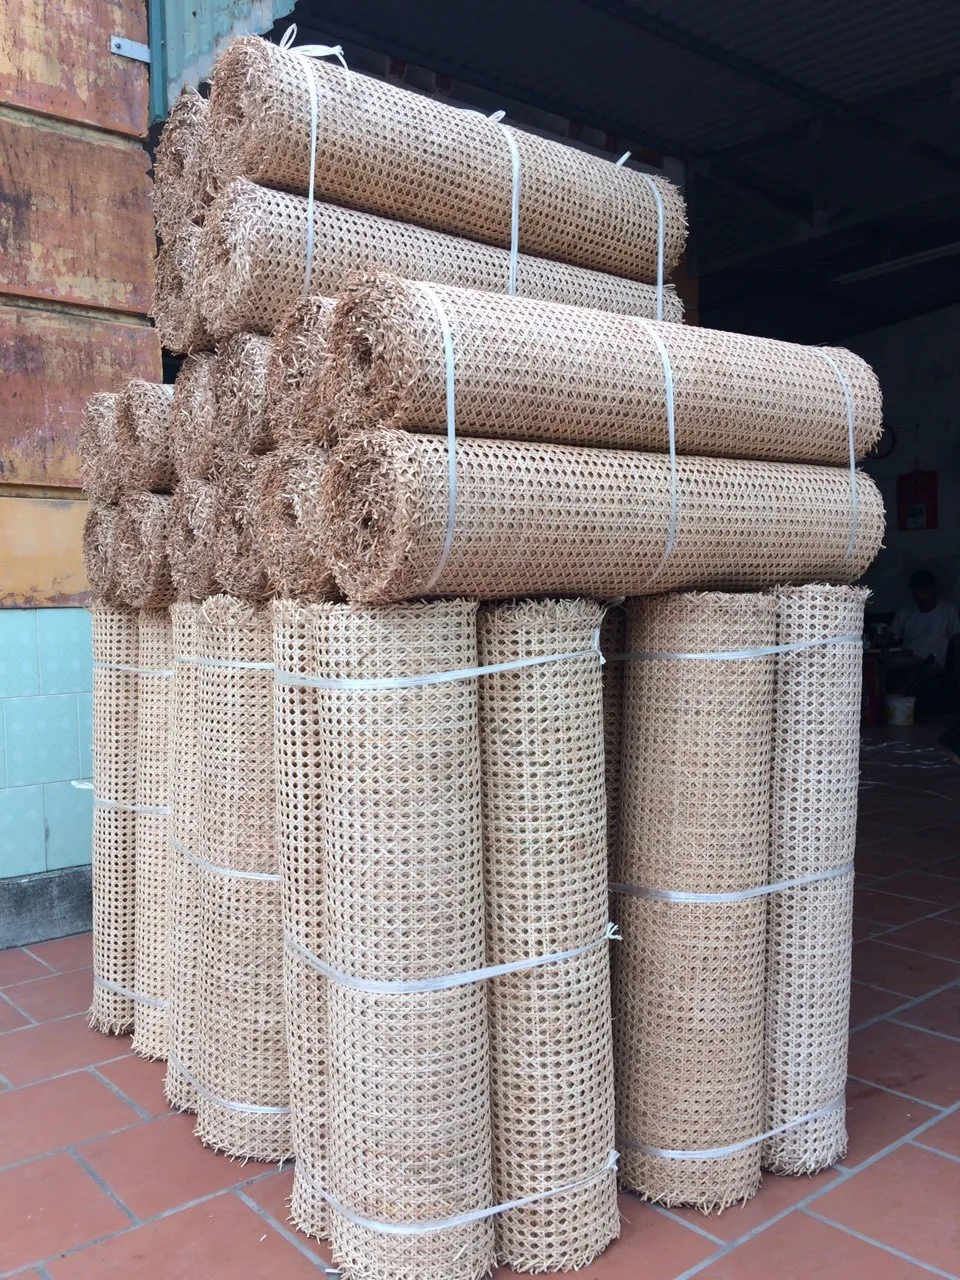 Rattan Webbing Cane With Good Price From Vietnam | 2021